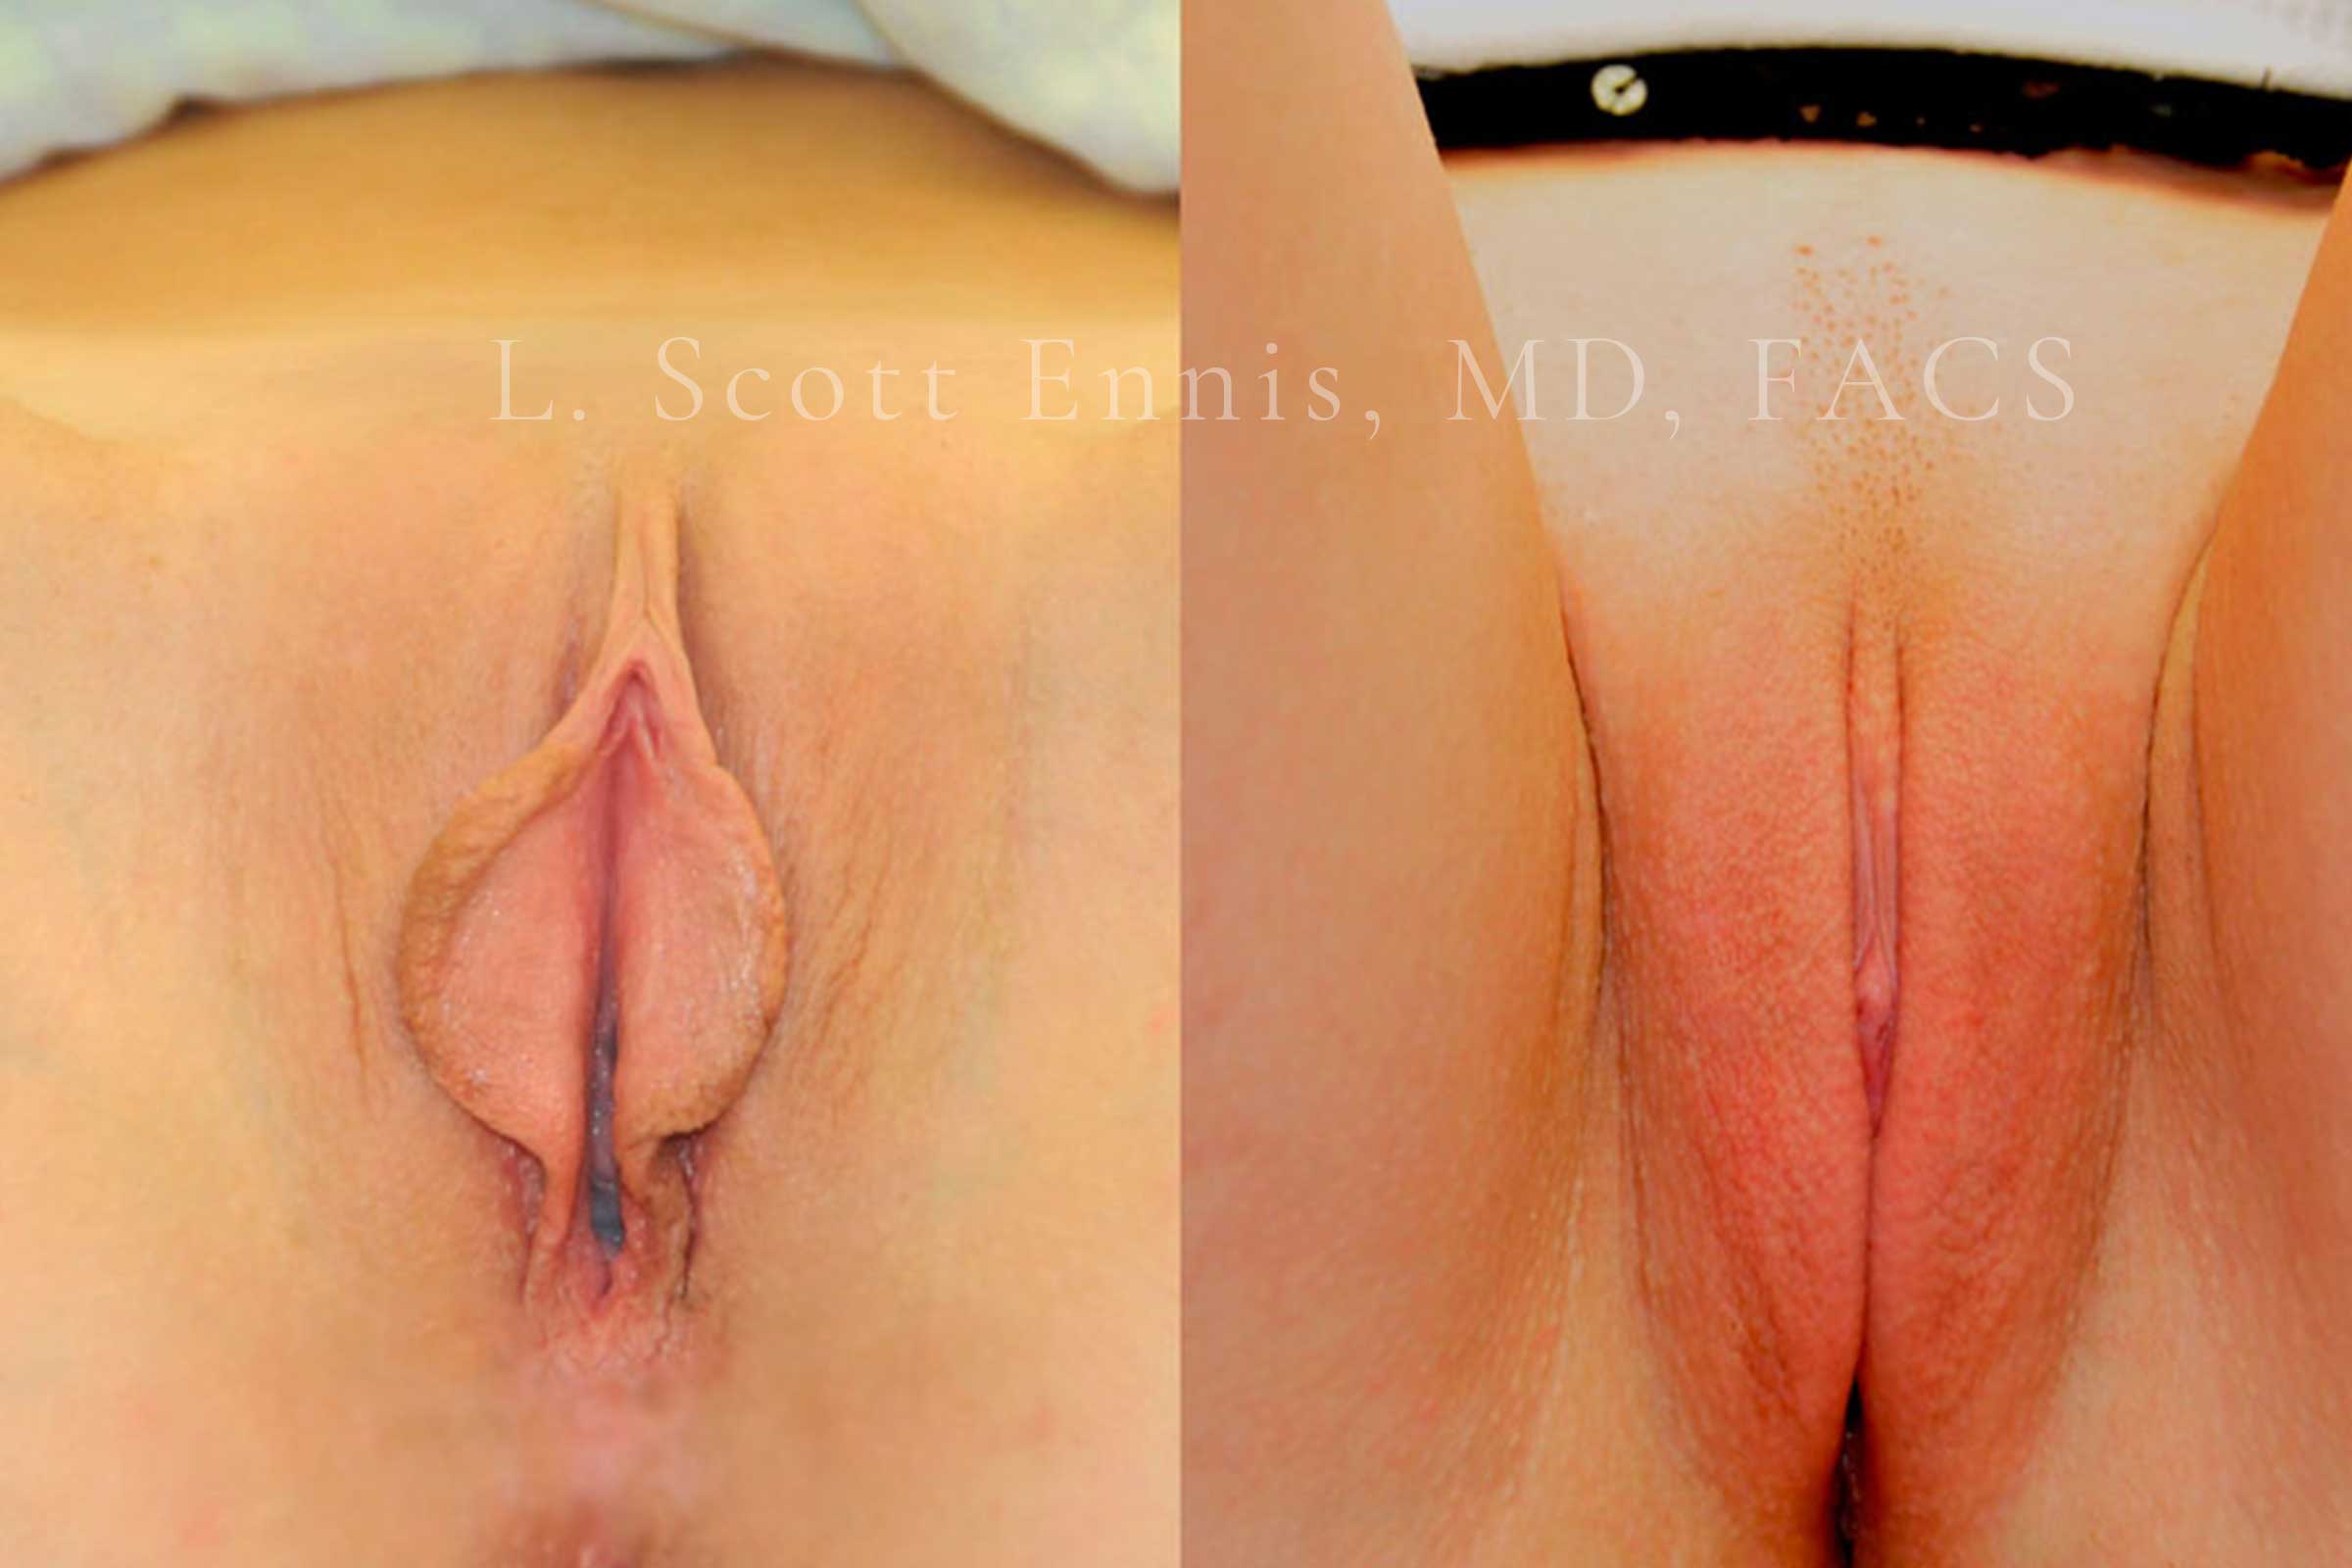 Dick to vagina surgery before and after pics